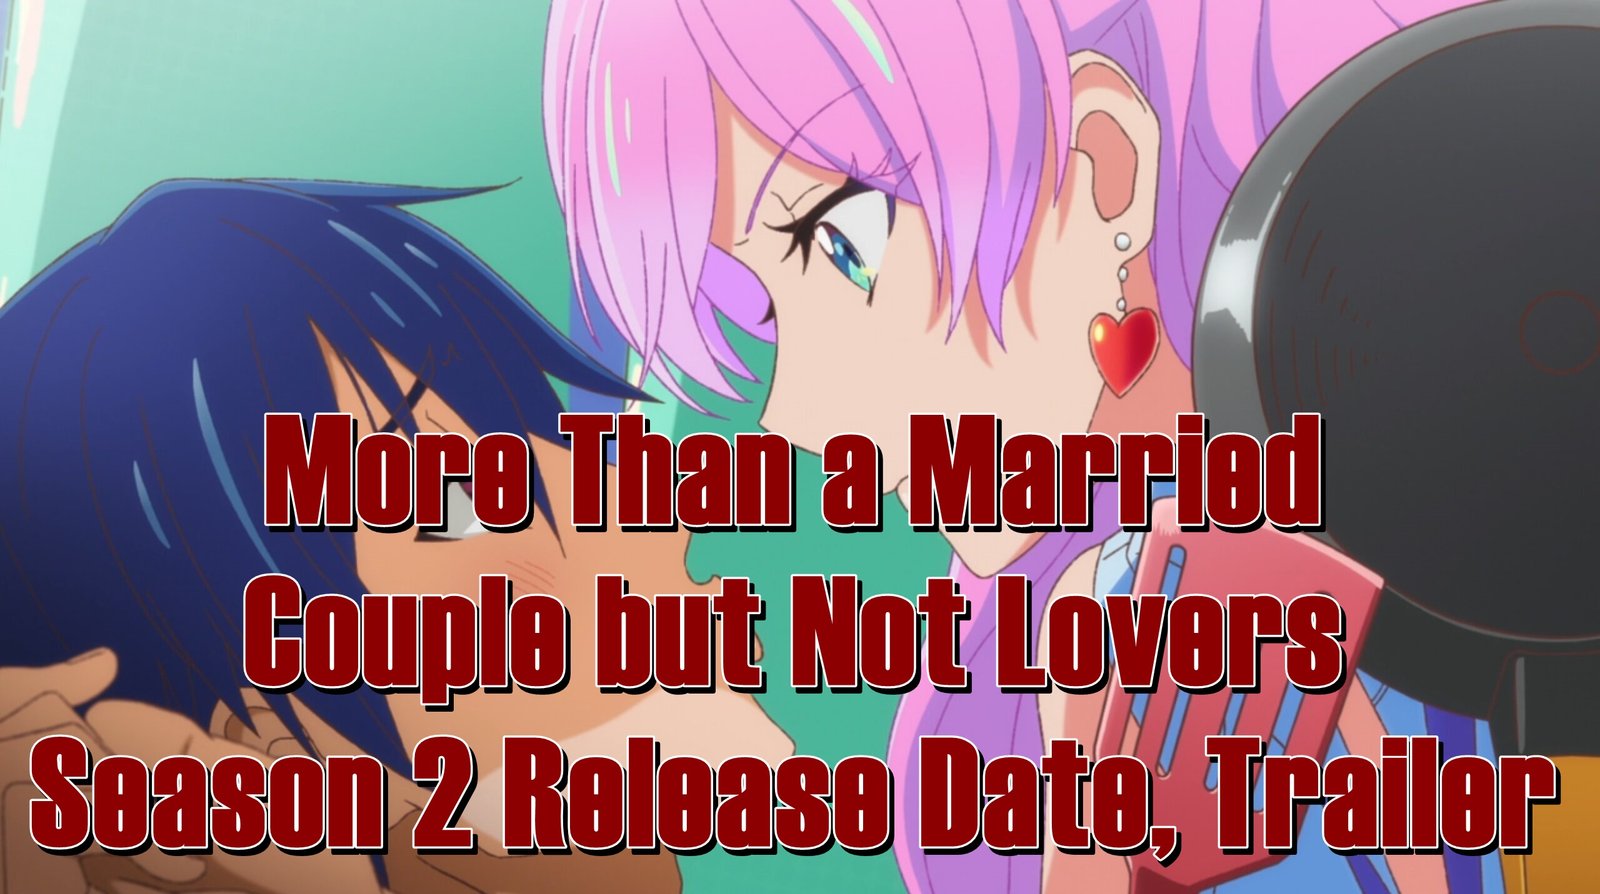 More Than a Married Couple but Not Lovers Season 2 Release Date, Trailer